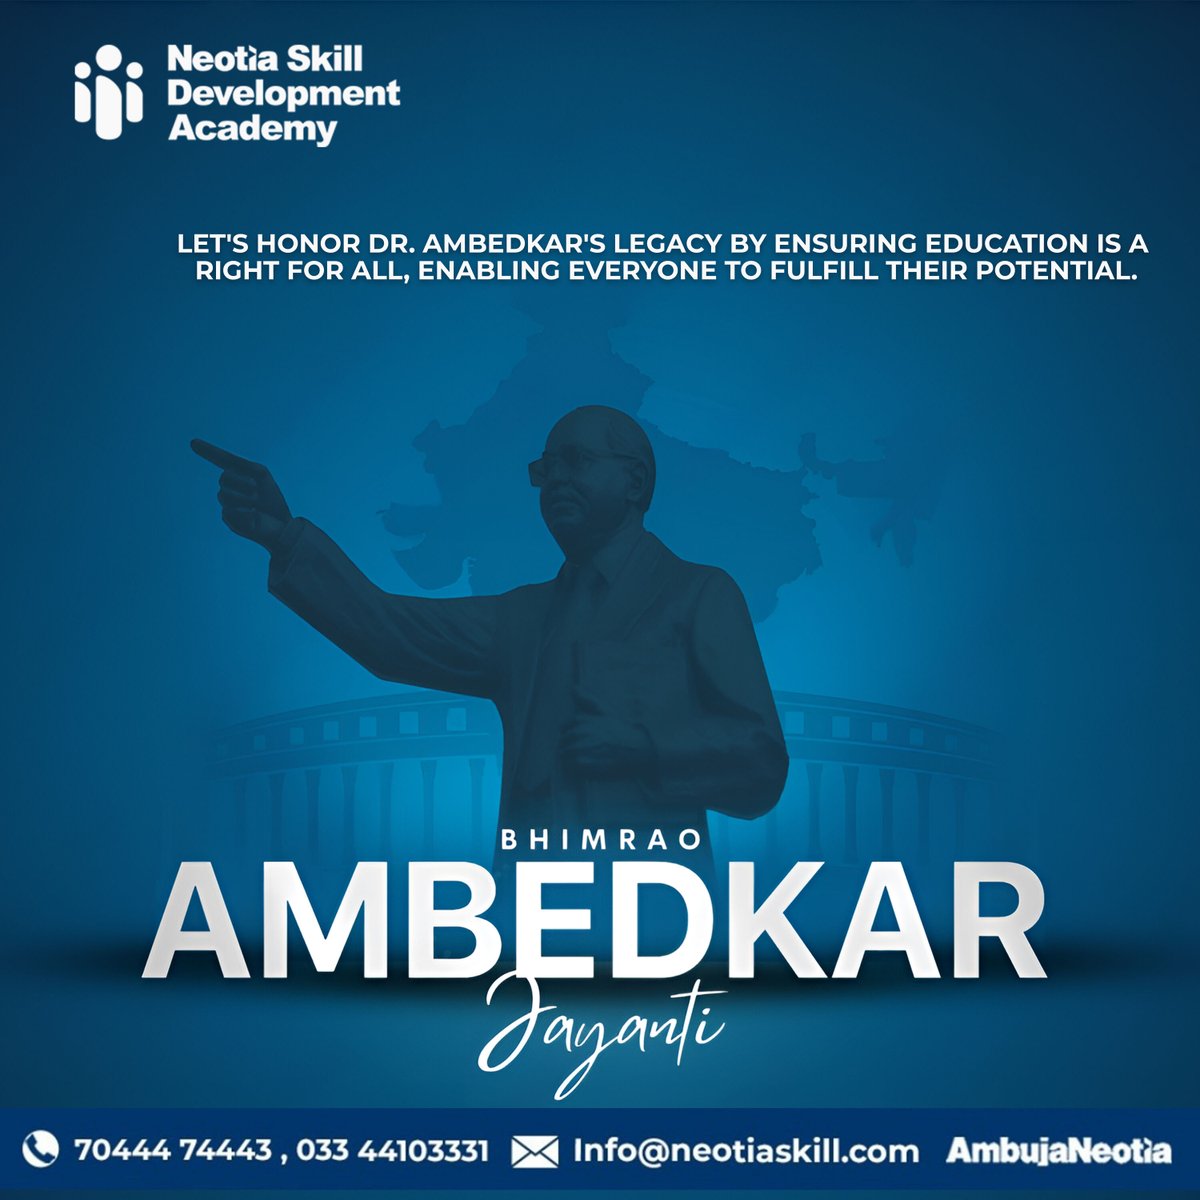 Celebrate #AmbedkarJayanti with Neotia Skill Development Academy! Empowering job seekers with essential skills for success! Join us in honoring Dr. B.R. Ambedkar's vision of empowerment! #SkillDevelopment #Empowerment #NeotiaAcademy #AmbujaNeotia